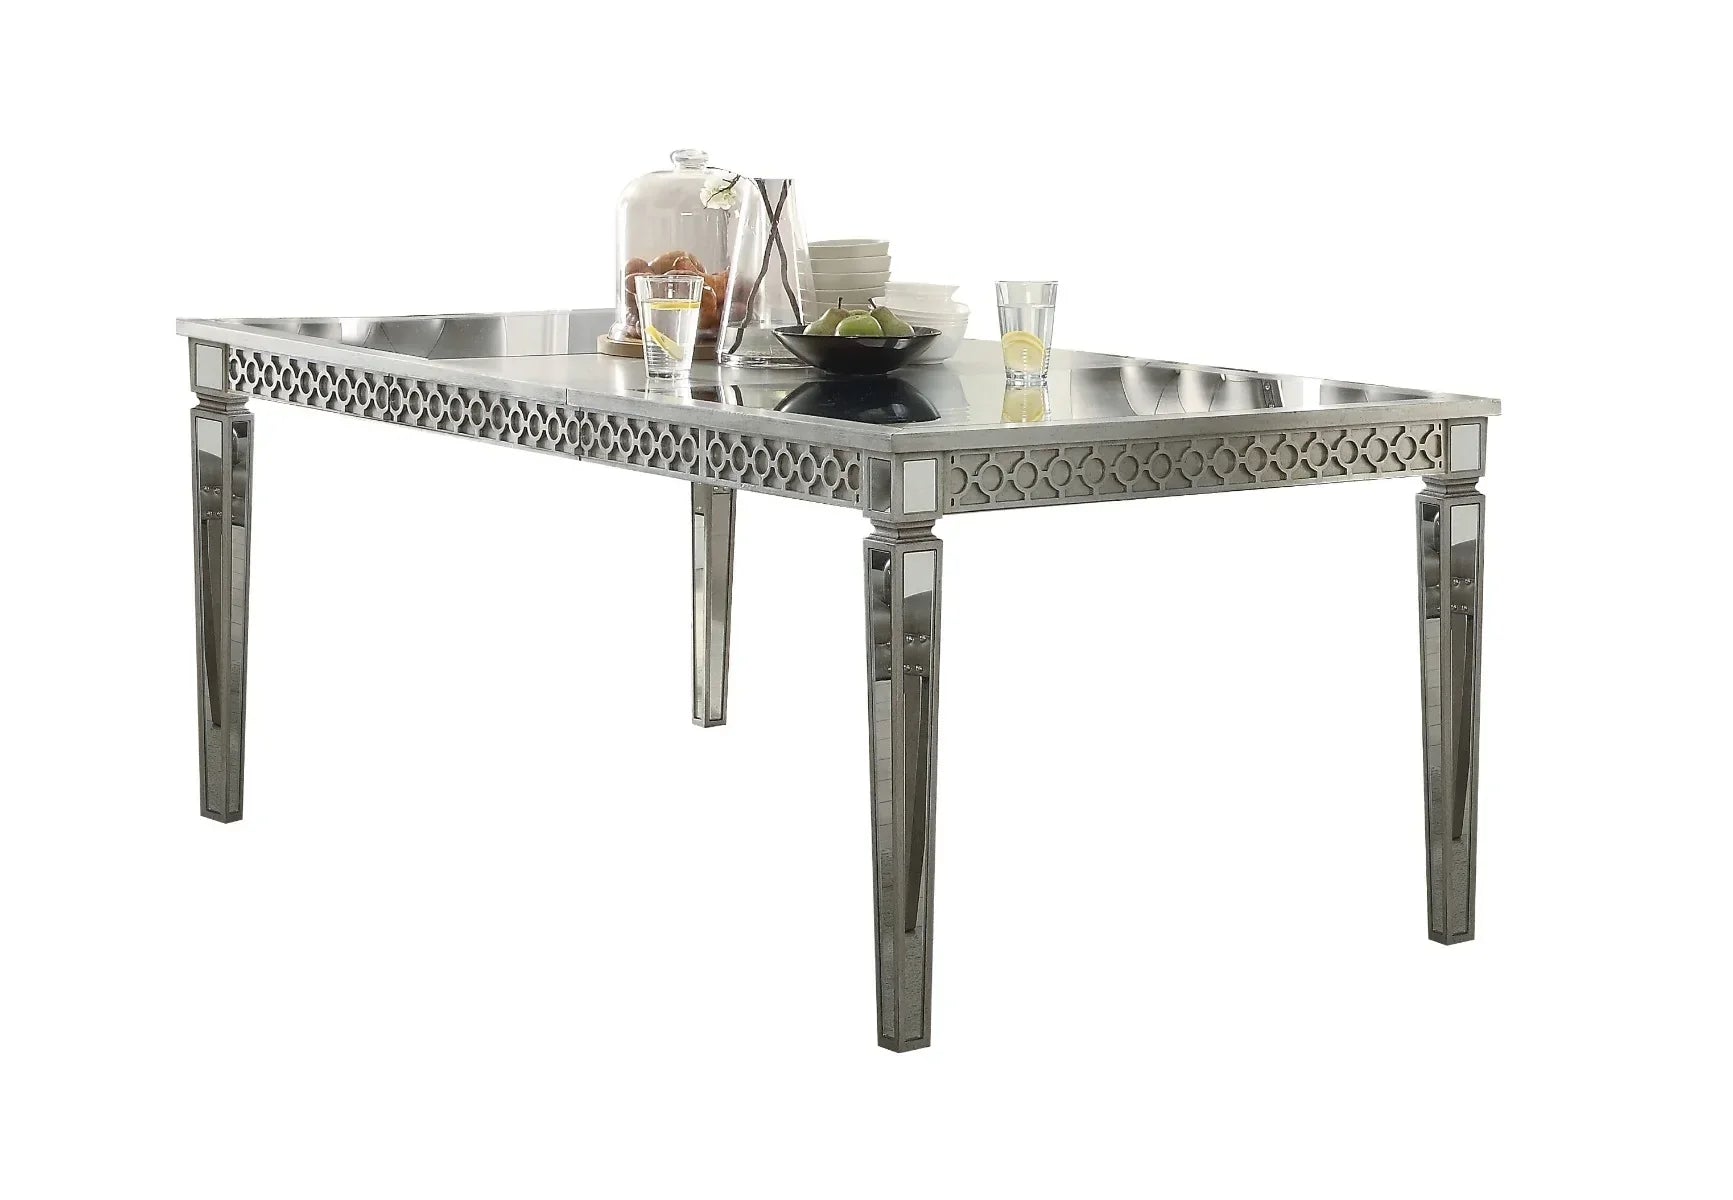 Kacela Mirrored & Antique Silver Finish Dining Table Model 72155 By ACME Furniture